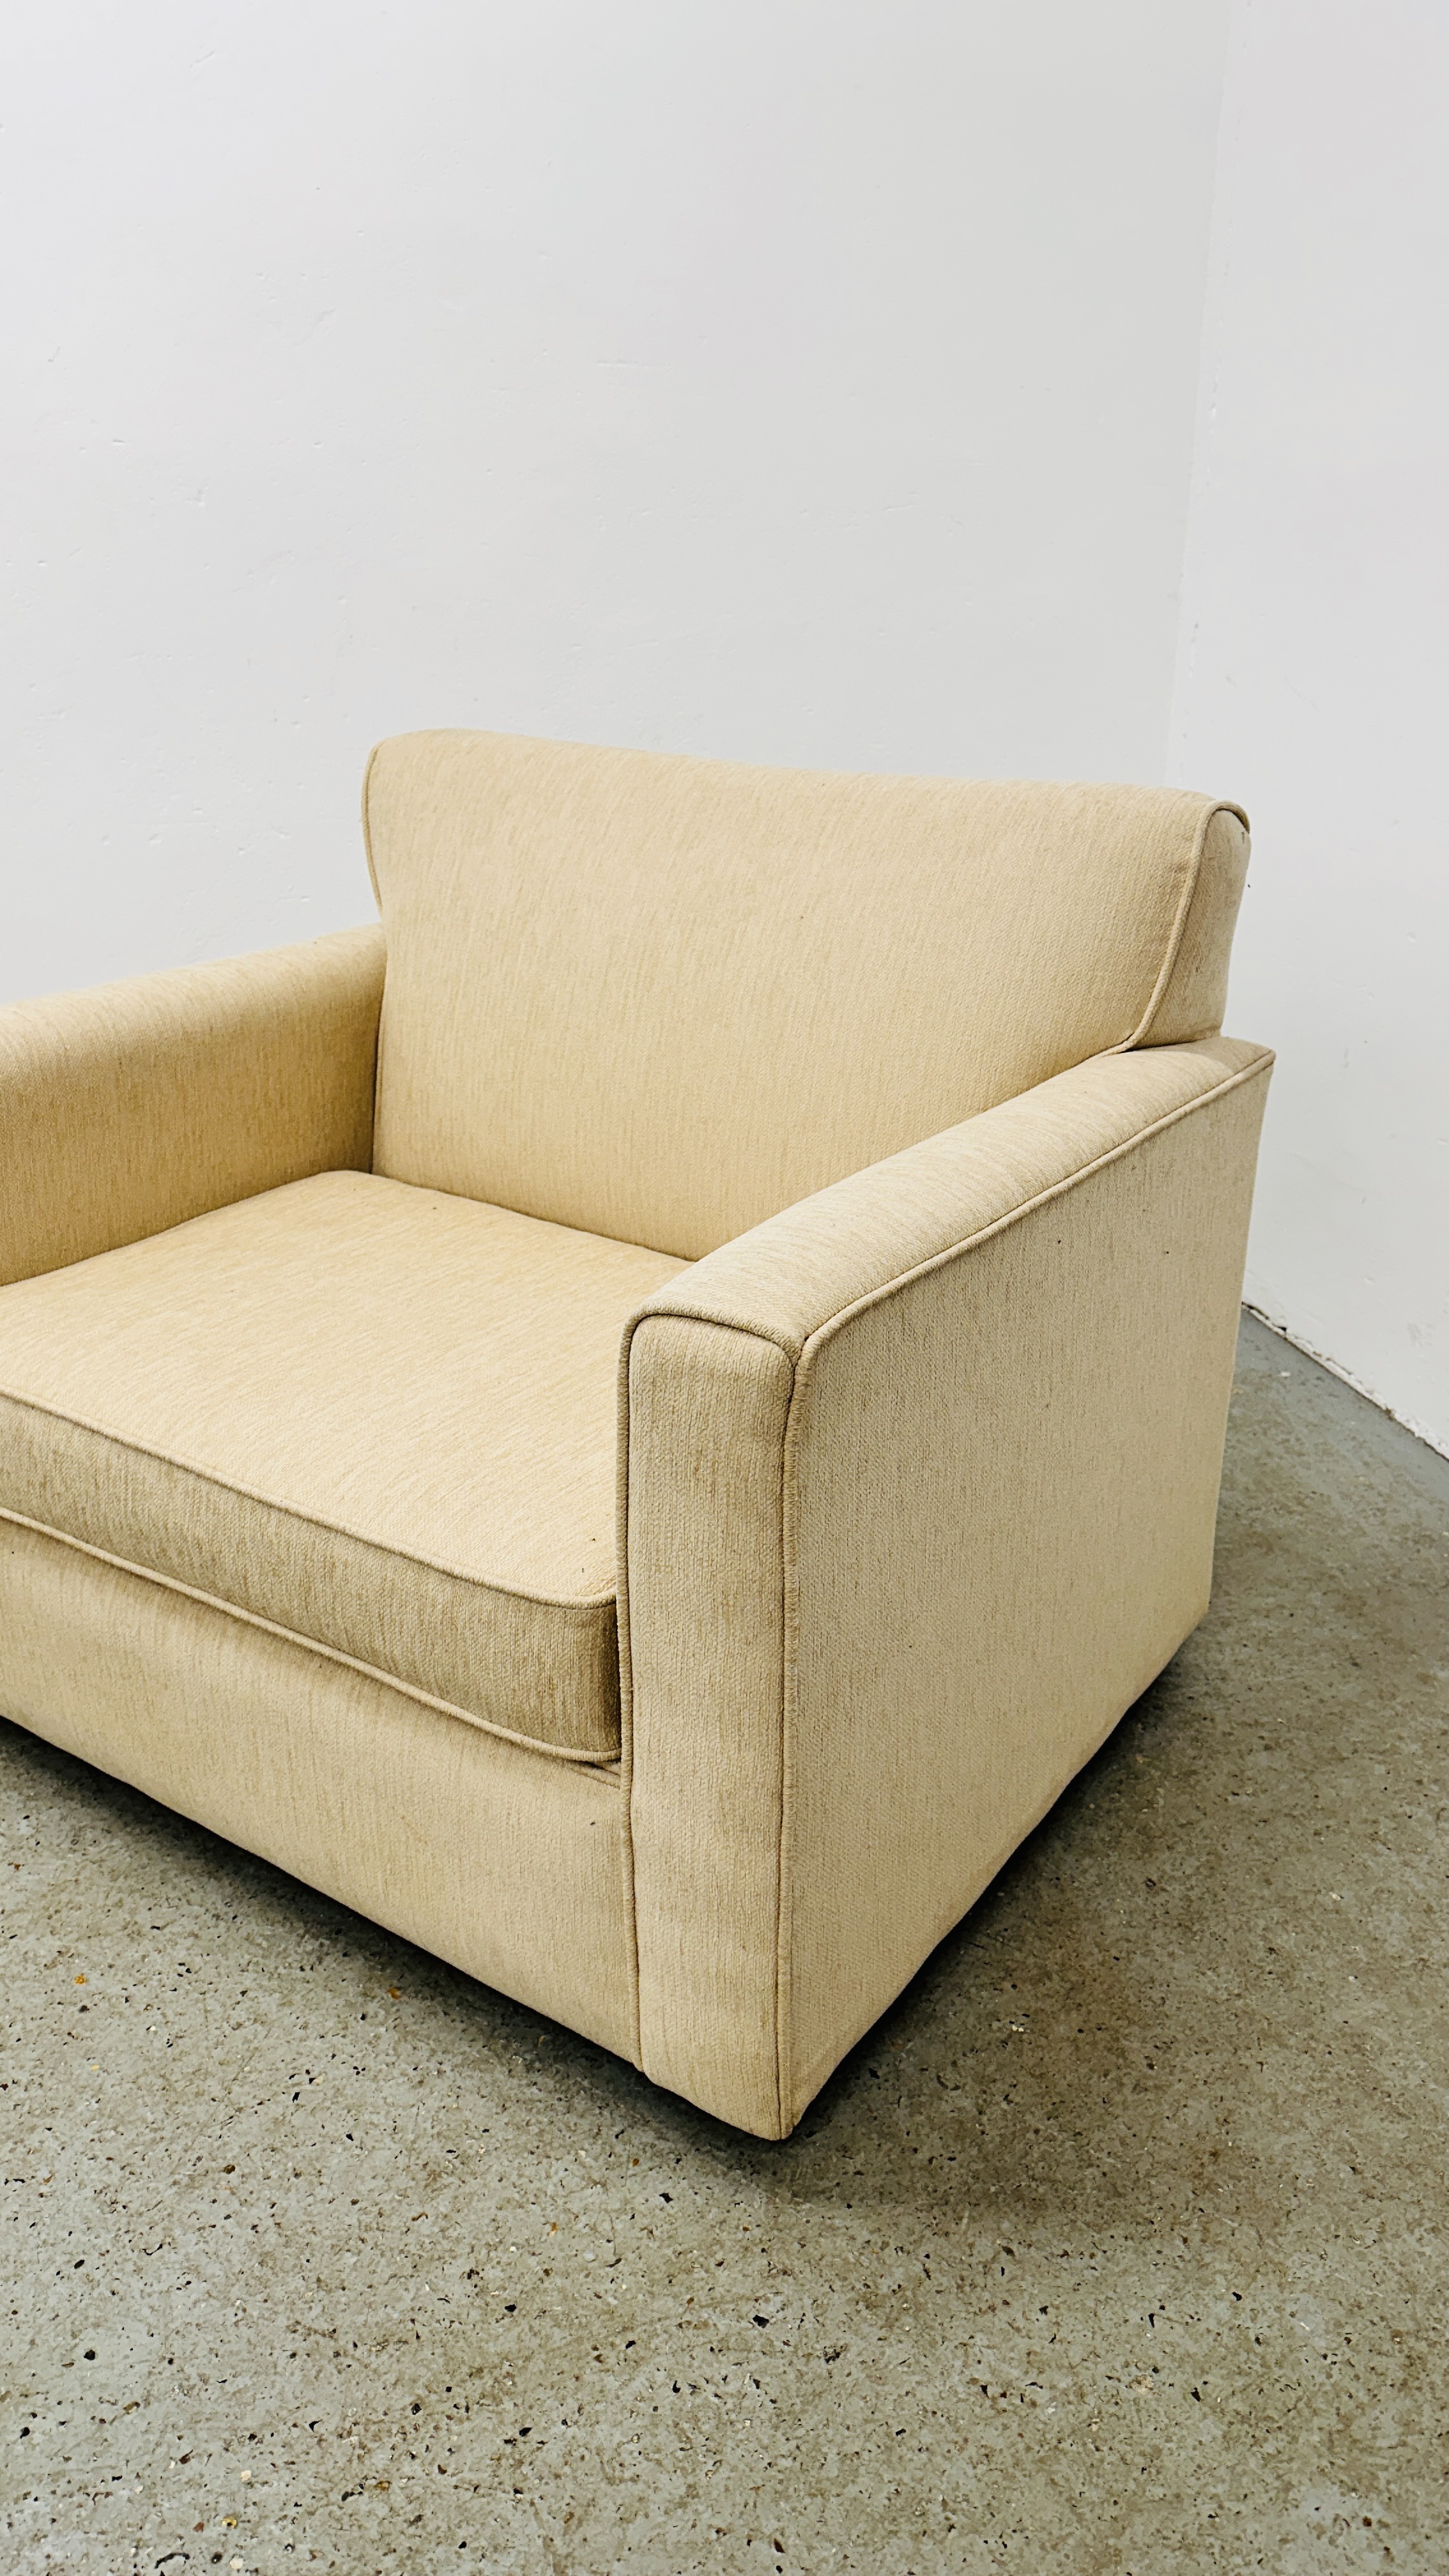 CREAM UPHOLSTERED ARM CHAIR / SOFA BED. - Image 5 of 12